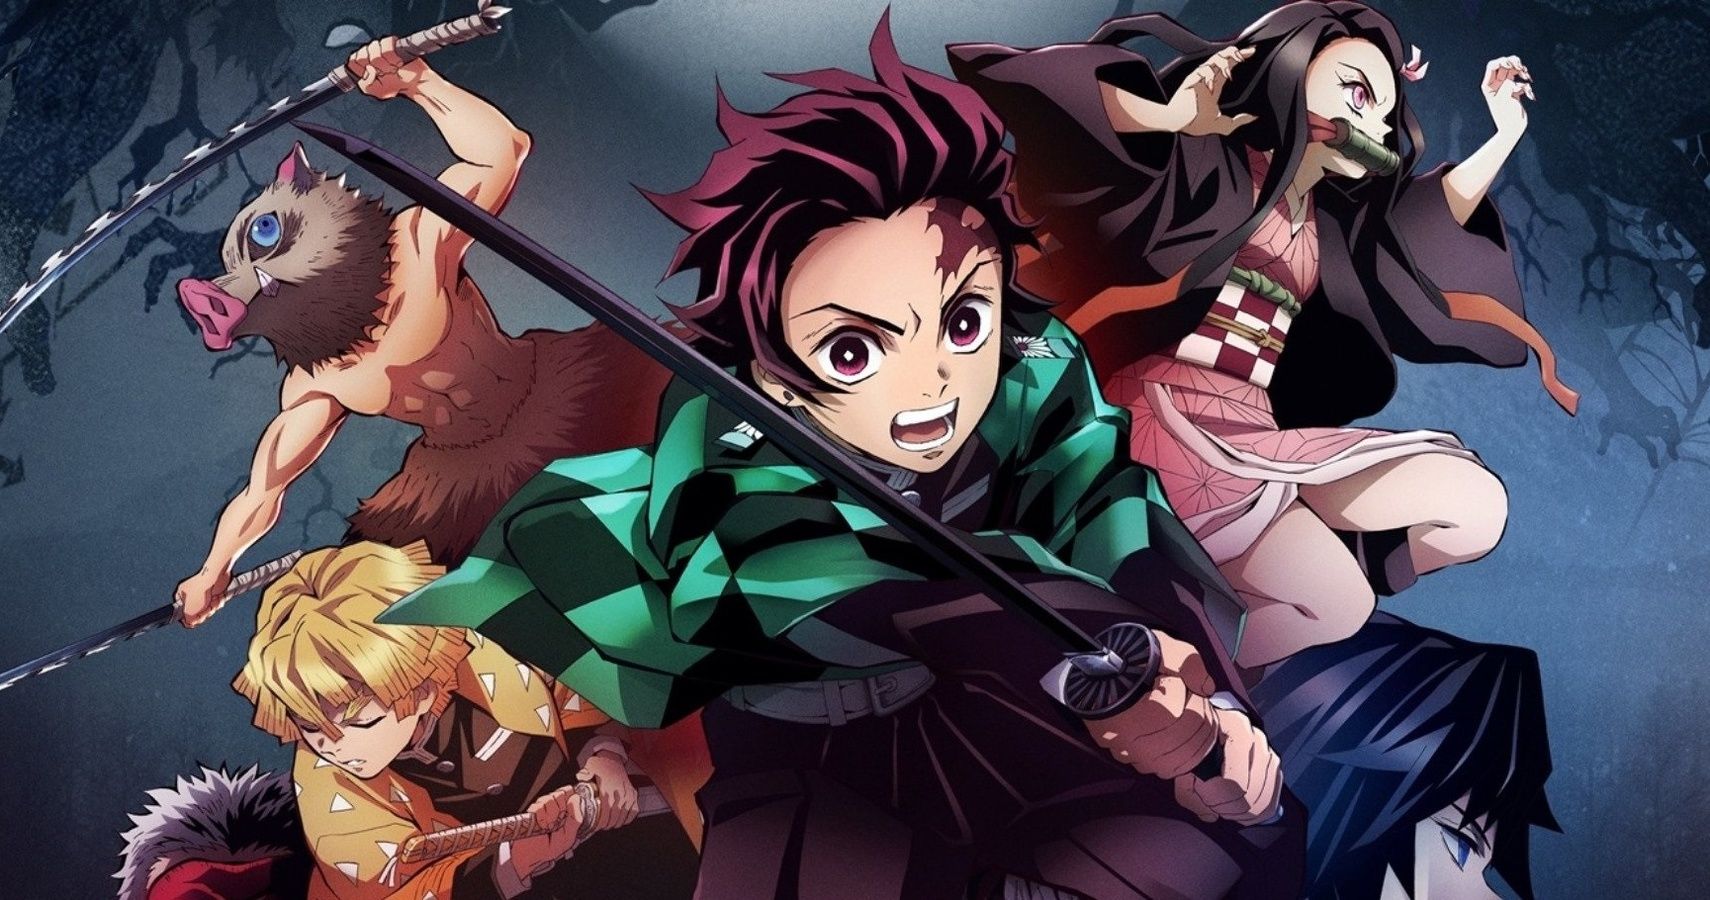 Review: Demon Slayer Movie Answers Question 'What If Demon Slayer Had a  Movie?